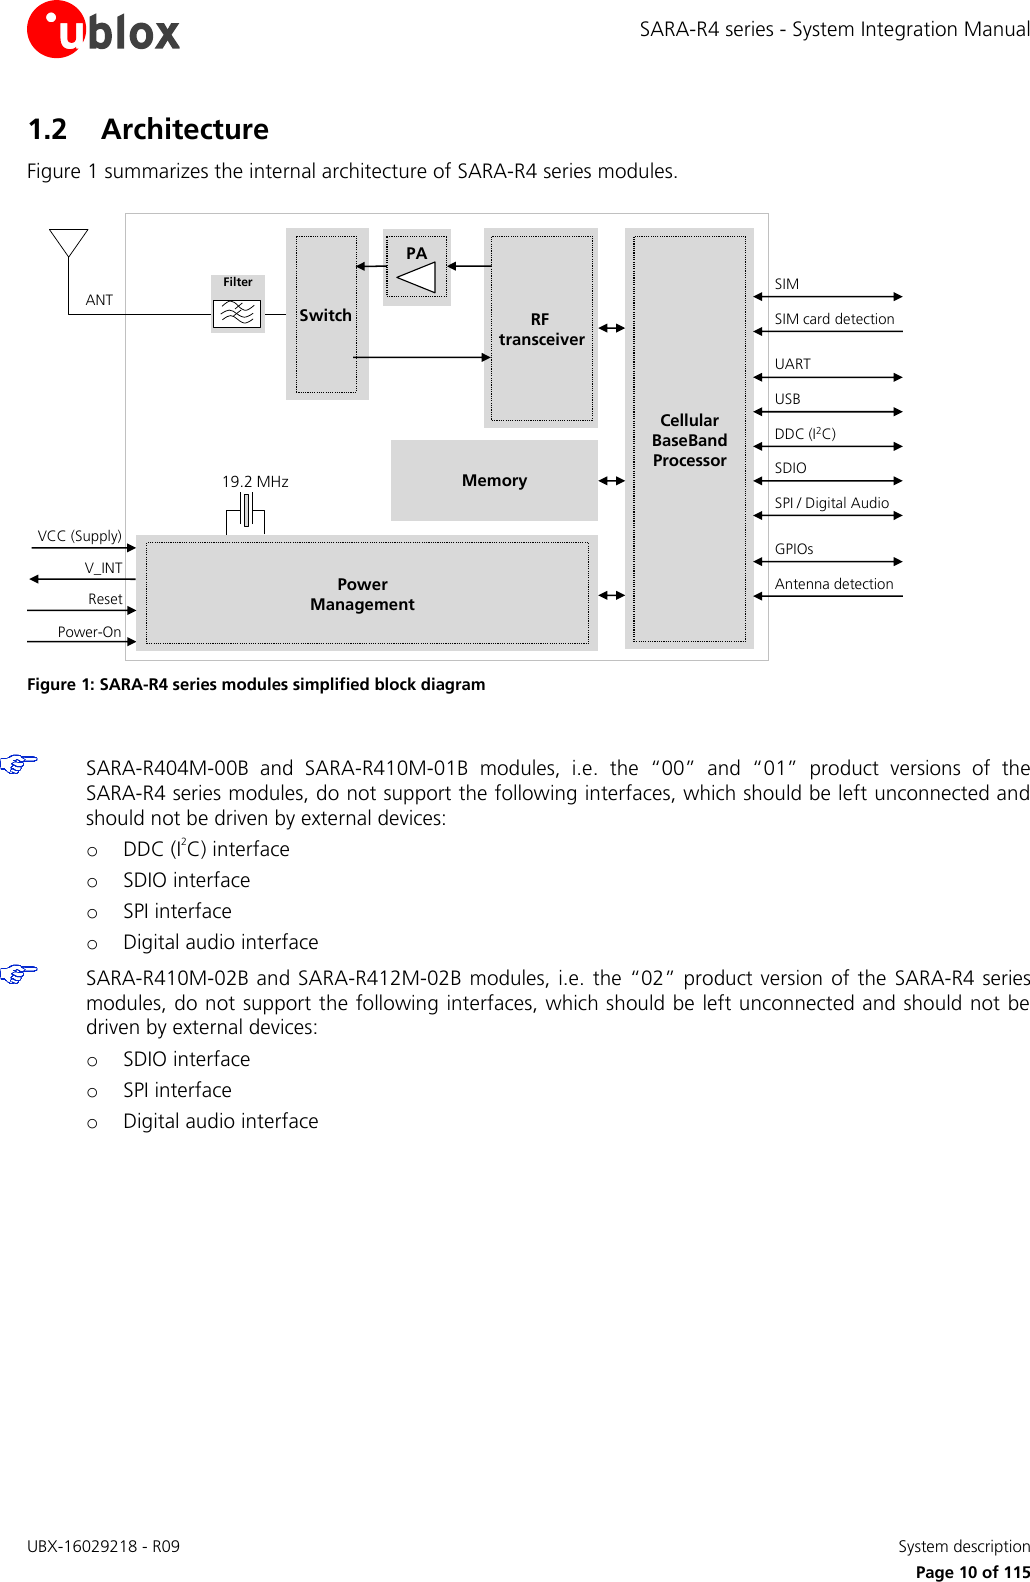 SARA-R4 series - System Integration Manual UBX-16029218 - R09    System description     Page 10 of 115 1.2 Architecture Figure 1 summarizes the internal architecture of SARA-R4 series modules. MemoryV_INTRF transceiverCellularBaseBandProcessorANTVCC (Supply)USBDDC (I2C)SIM card detectionSIMUARTPower-OnResetGPIOsAntenna detectionSwitchPA19.2 MHzPowerManagementFilterSDIOSPI / Digital Audio Figure 1: SARA-R4 series modules simplified block diagram   SARA-R404M-00B  and  SARA-R410M-01B  modules,  i.e.  the  “00”  and  “01”  product  versions  of  the  SARA-R4 series modules, do not support the following interfaces, which should be left unconnected and should not be driven by external devices: o DDC (I2C) interface o SDIO interface o SPI interface o Digital audio interface  SARA-R410M-02B and SARA-R412M-02B modules, i.e. the “02” product version of the SARA-R4 series modules, do not support the following interfaces, which should be left unconnected and should not be driven by external devices: o SDIO interface o SPI interface o Digital audio interface   